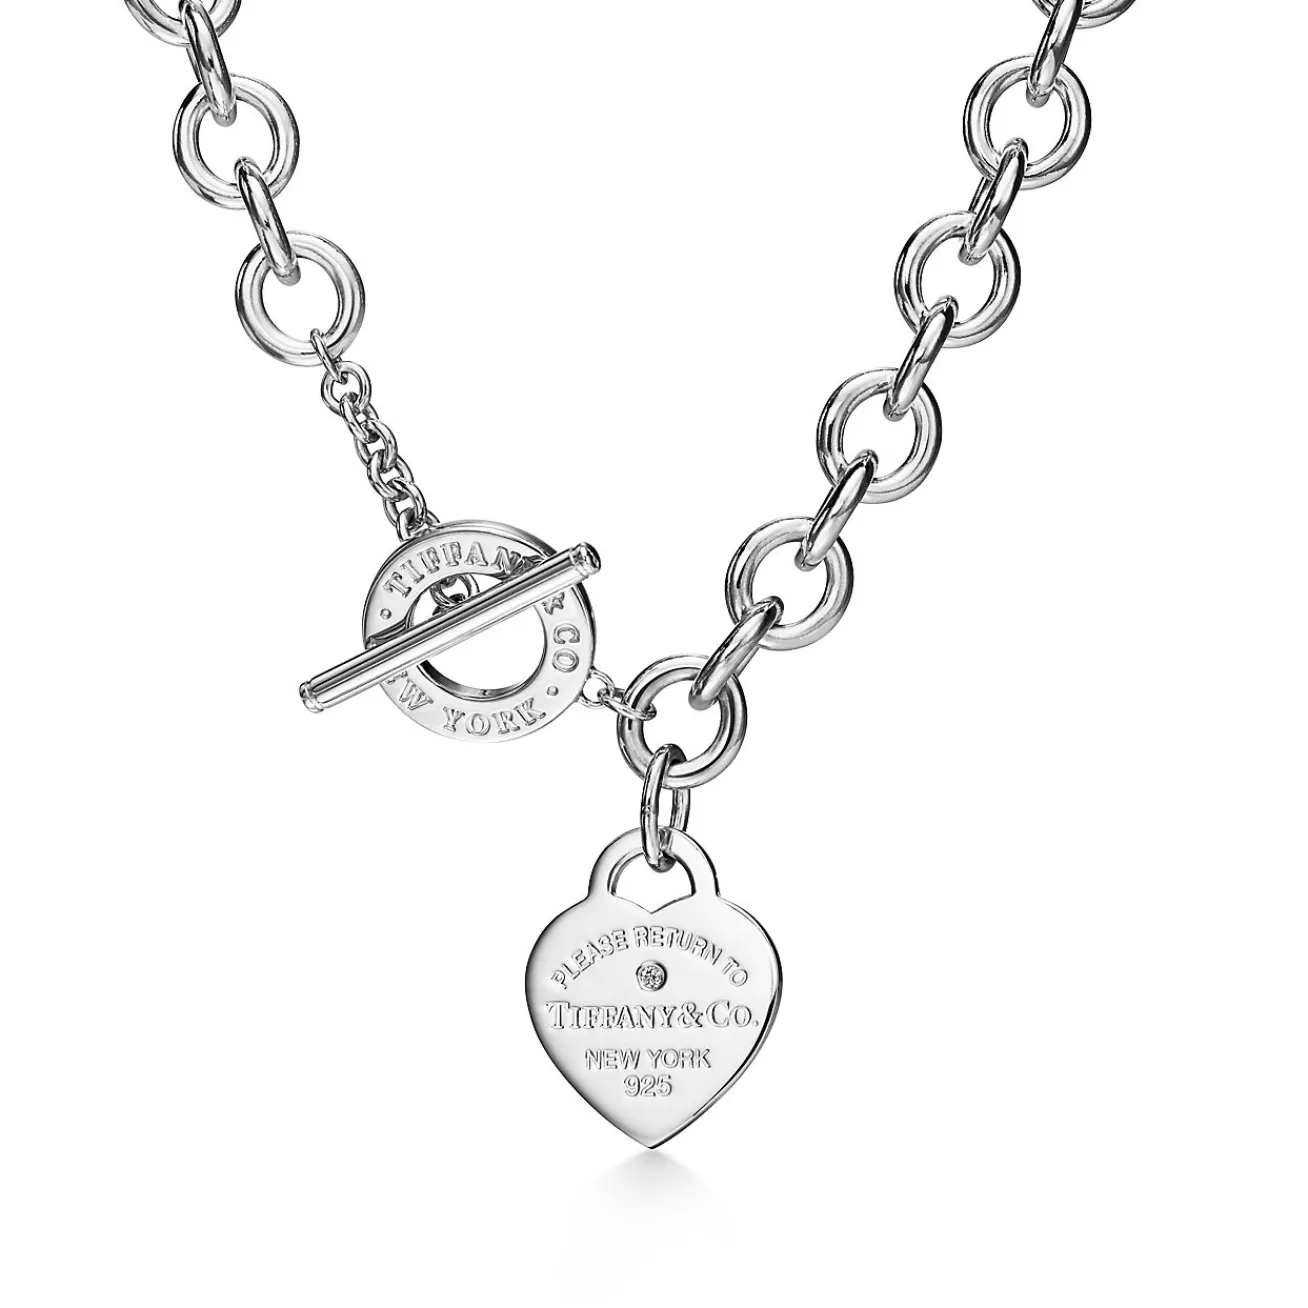 Tiffany & Co. Return to Tiffany® Heart Tag Necklace in Silver with a Diamond, Medium | ^ Necklaces & Pendants | Gifts for Her